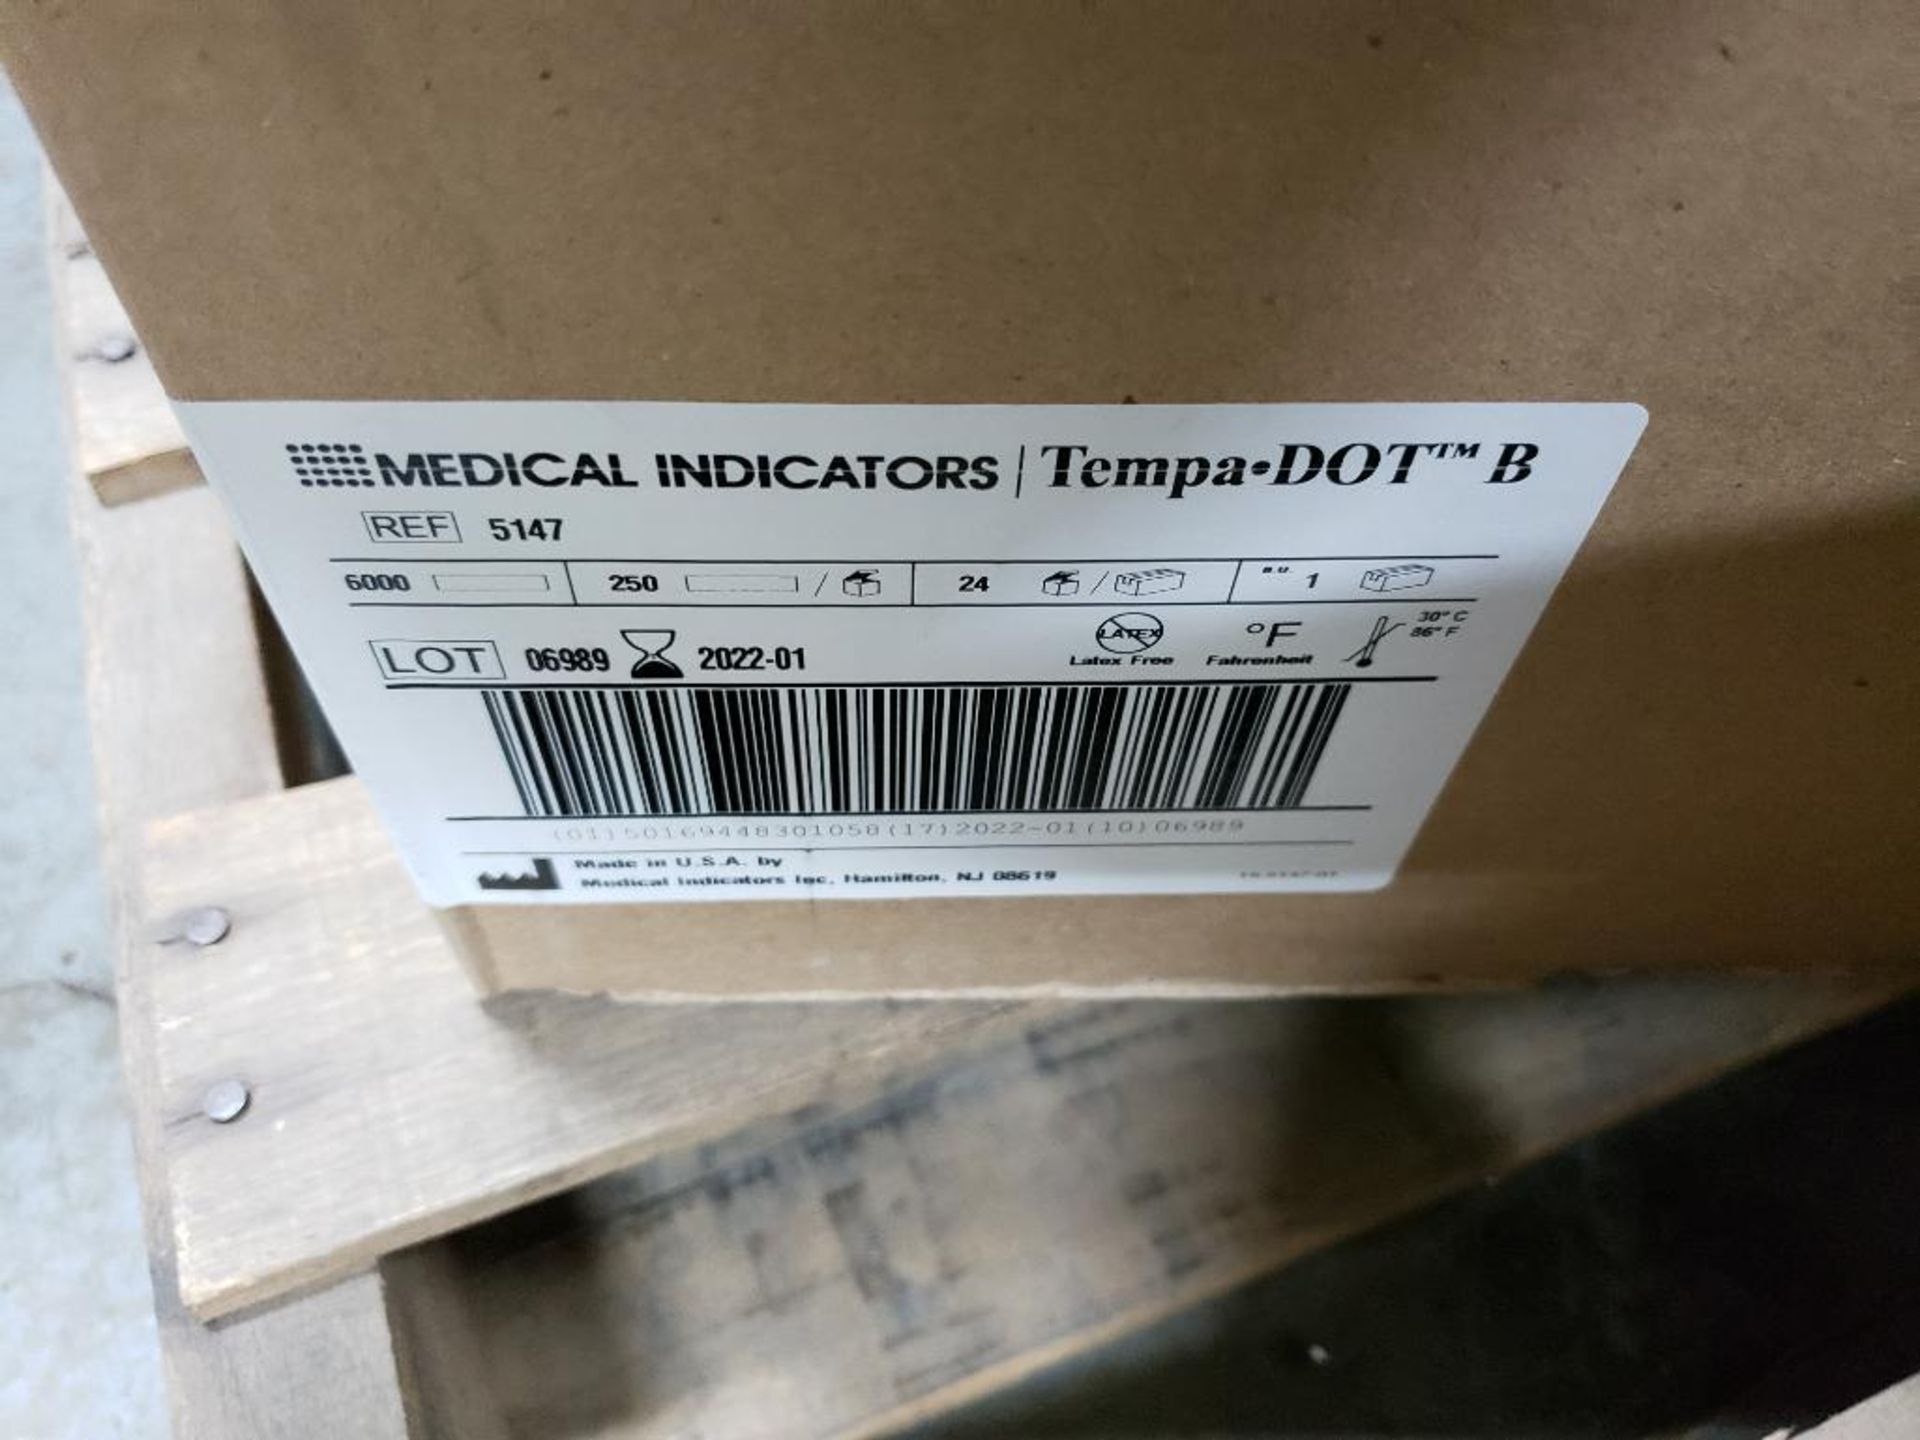 Qty 4000 - Tempa-DOT single use clinical thermometer. - Image 5 of 5